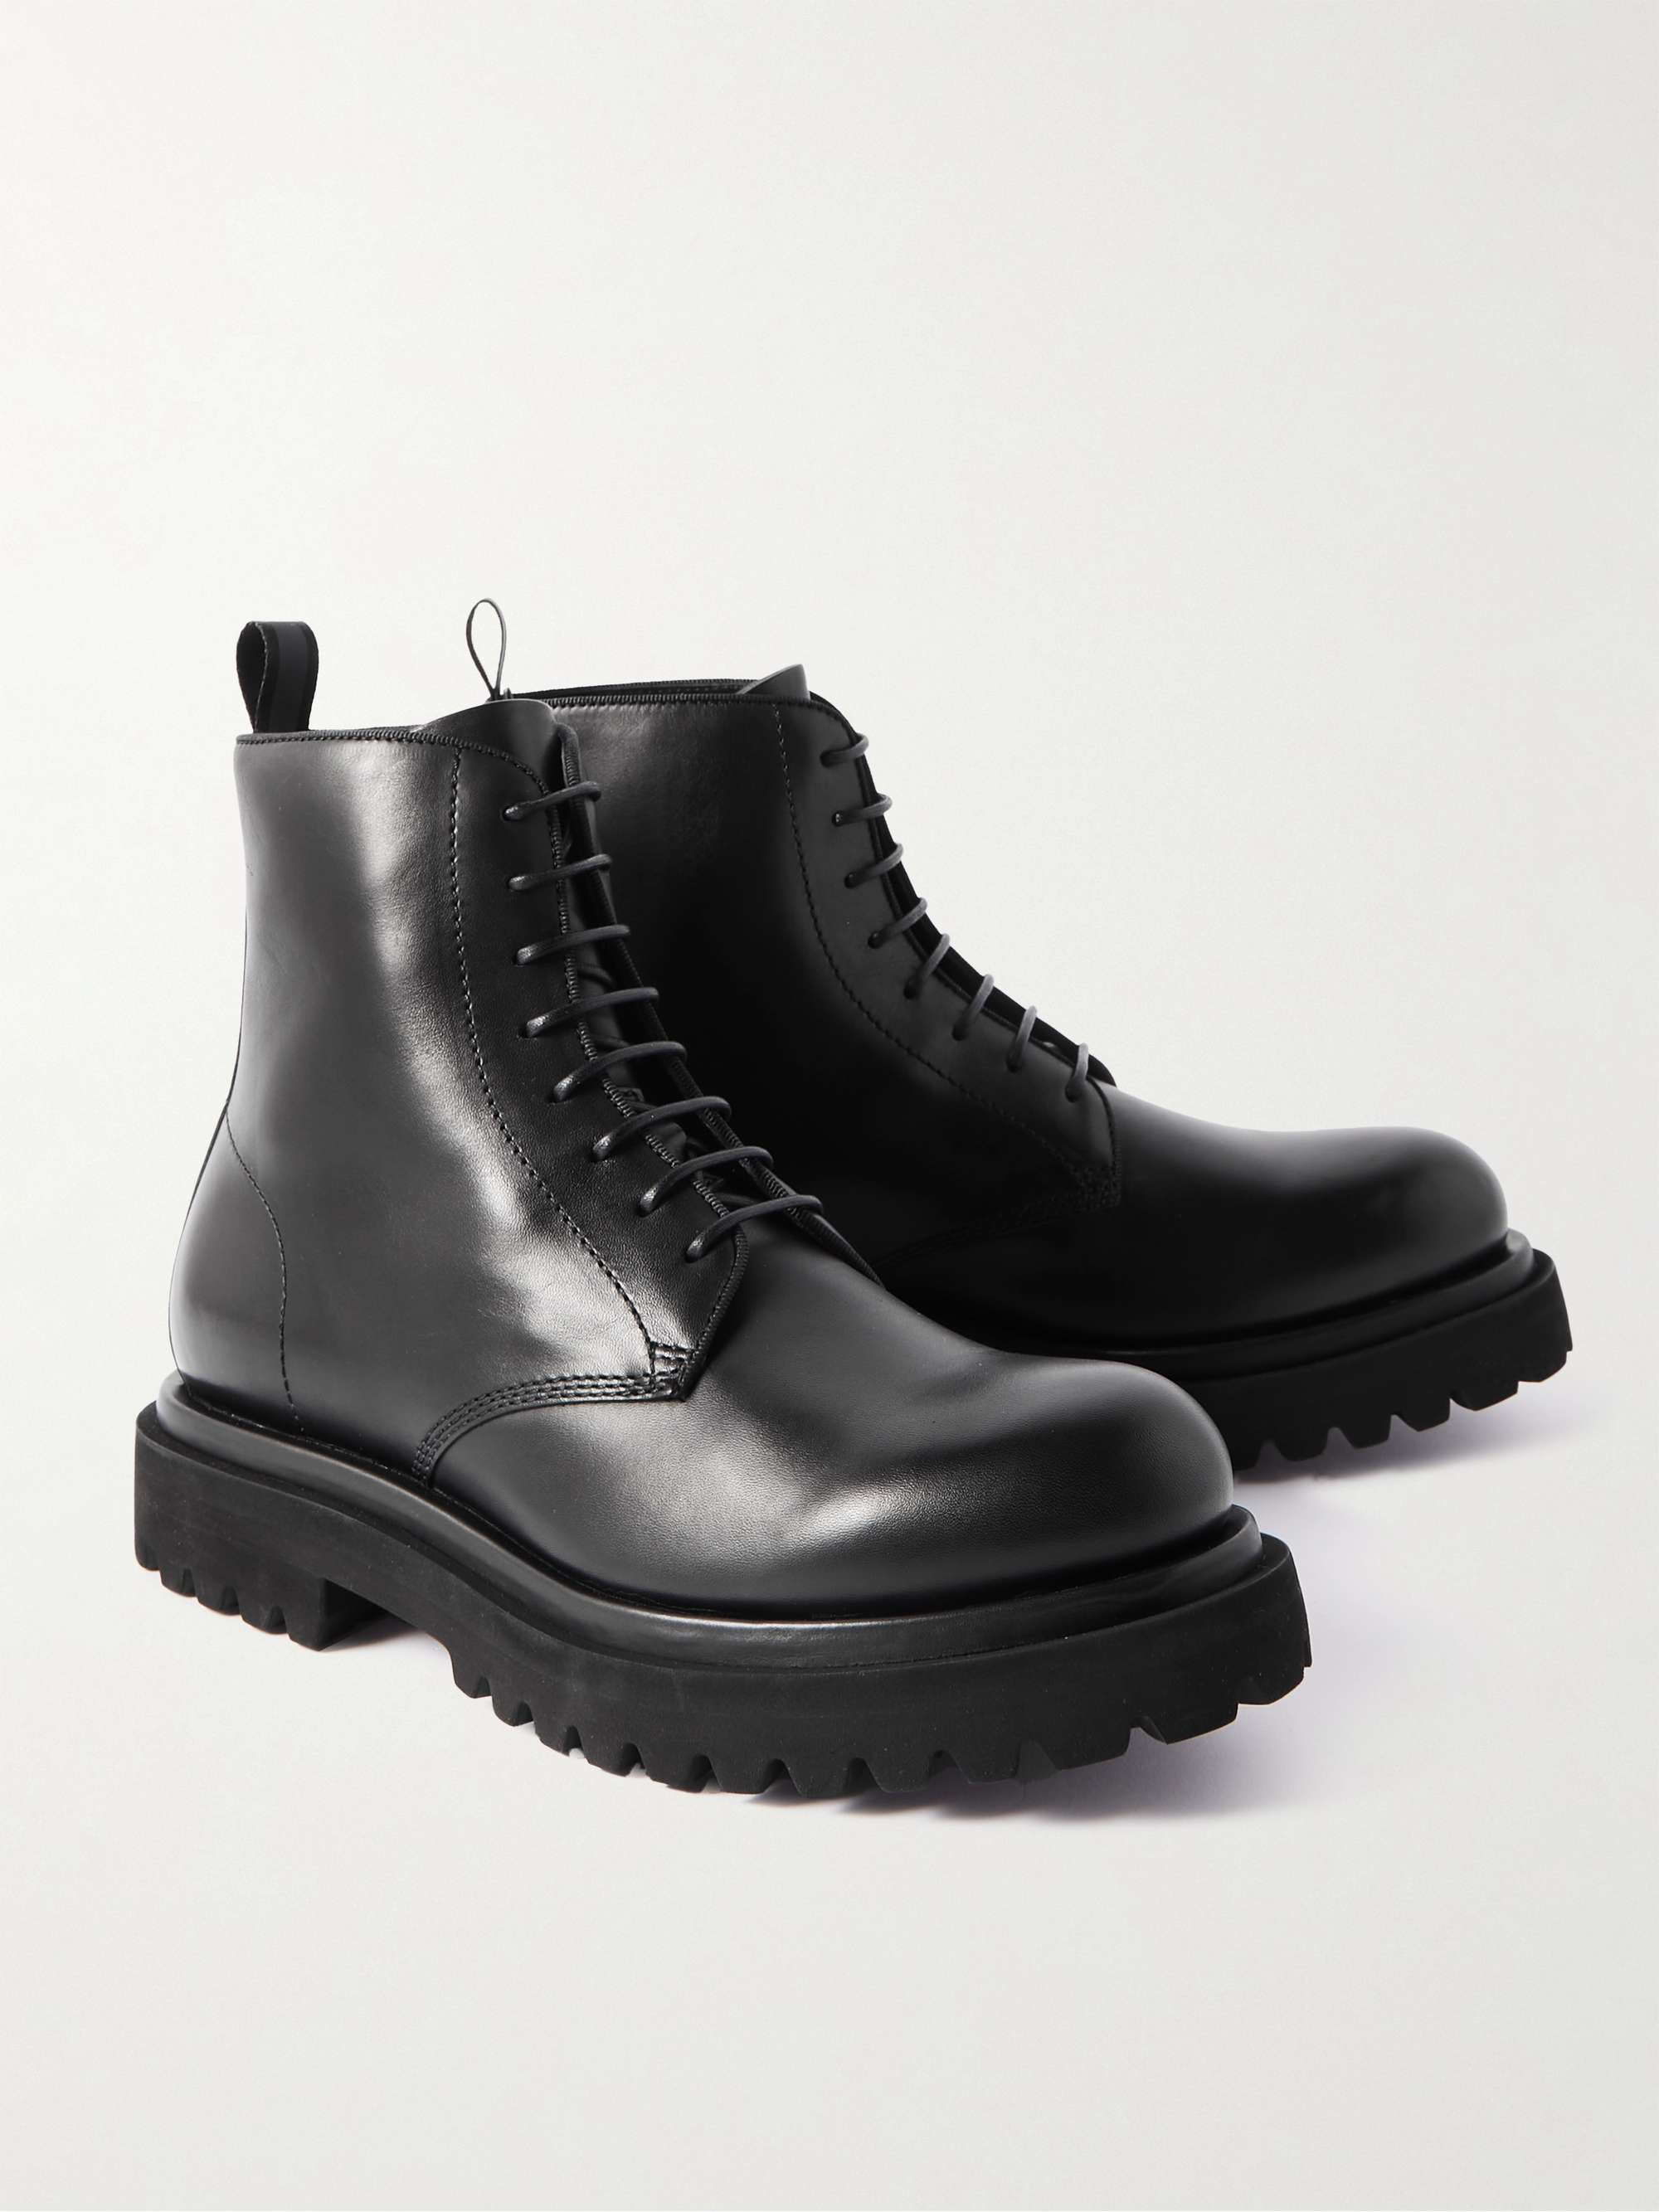 OFFICINE CREATIVE Eventual Leather Boots